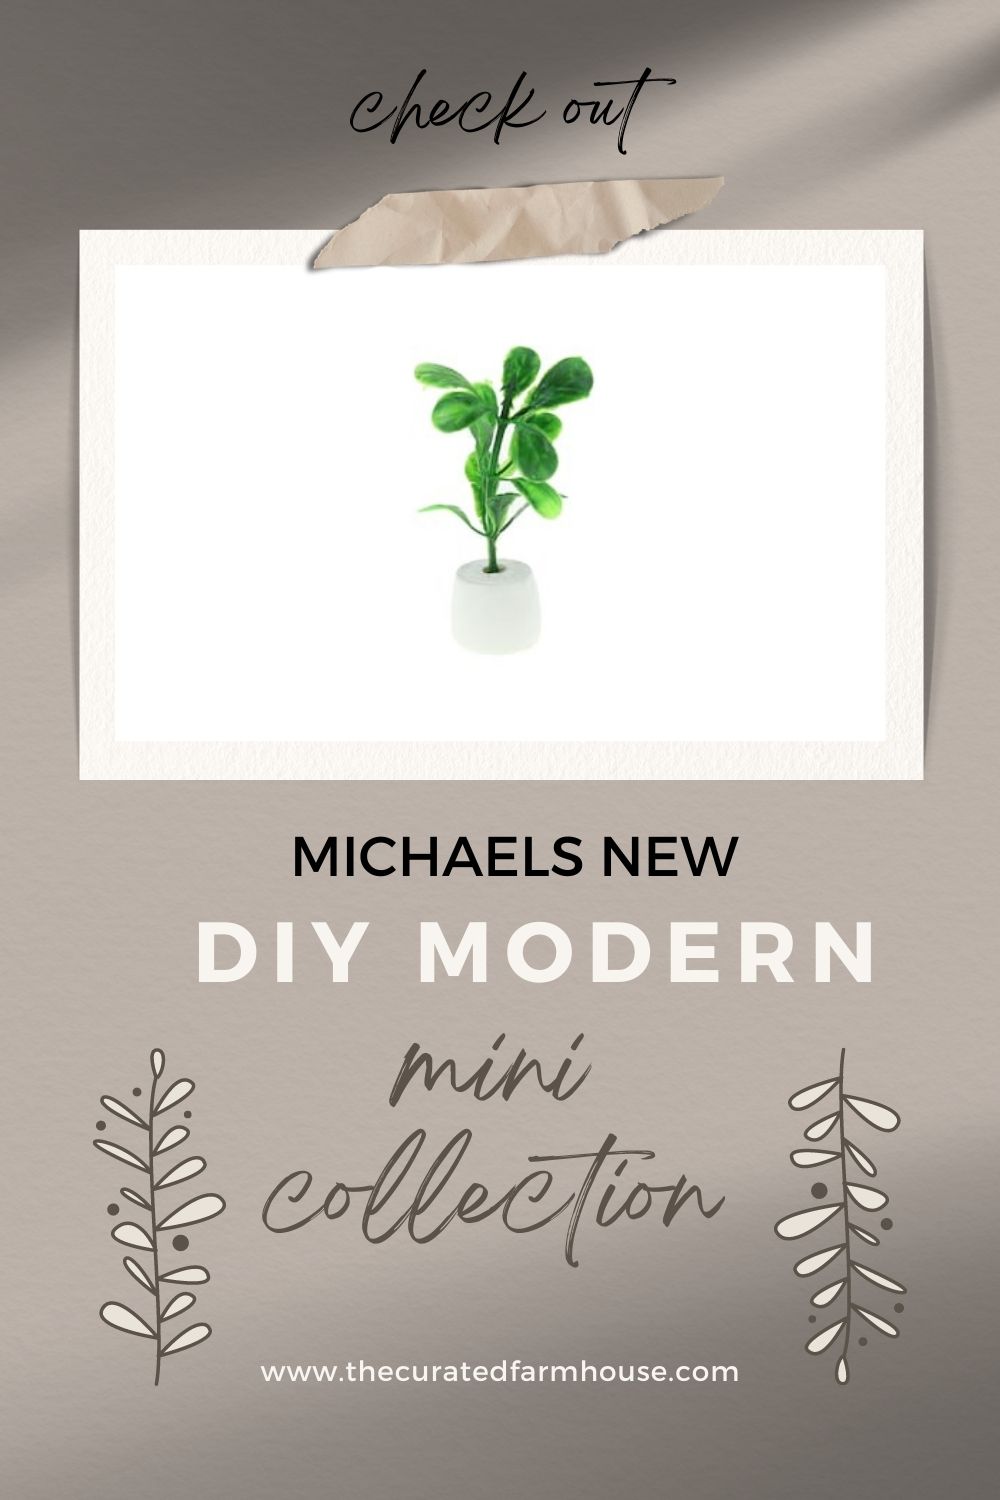 Check Out Michaels New DIY Modern Mini Line